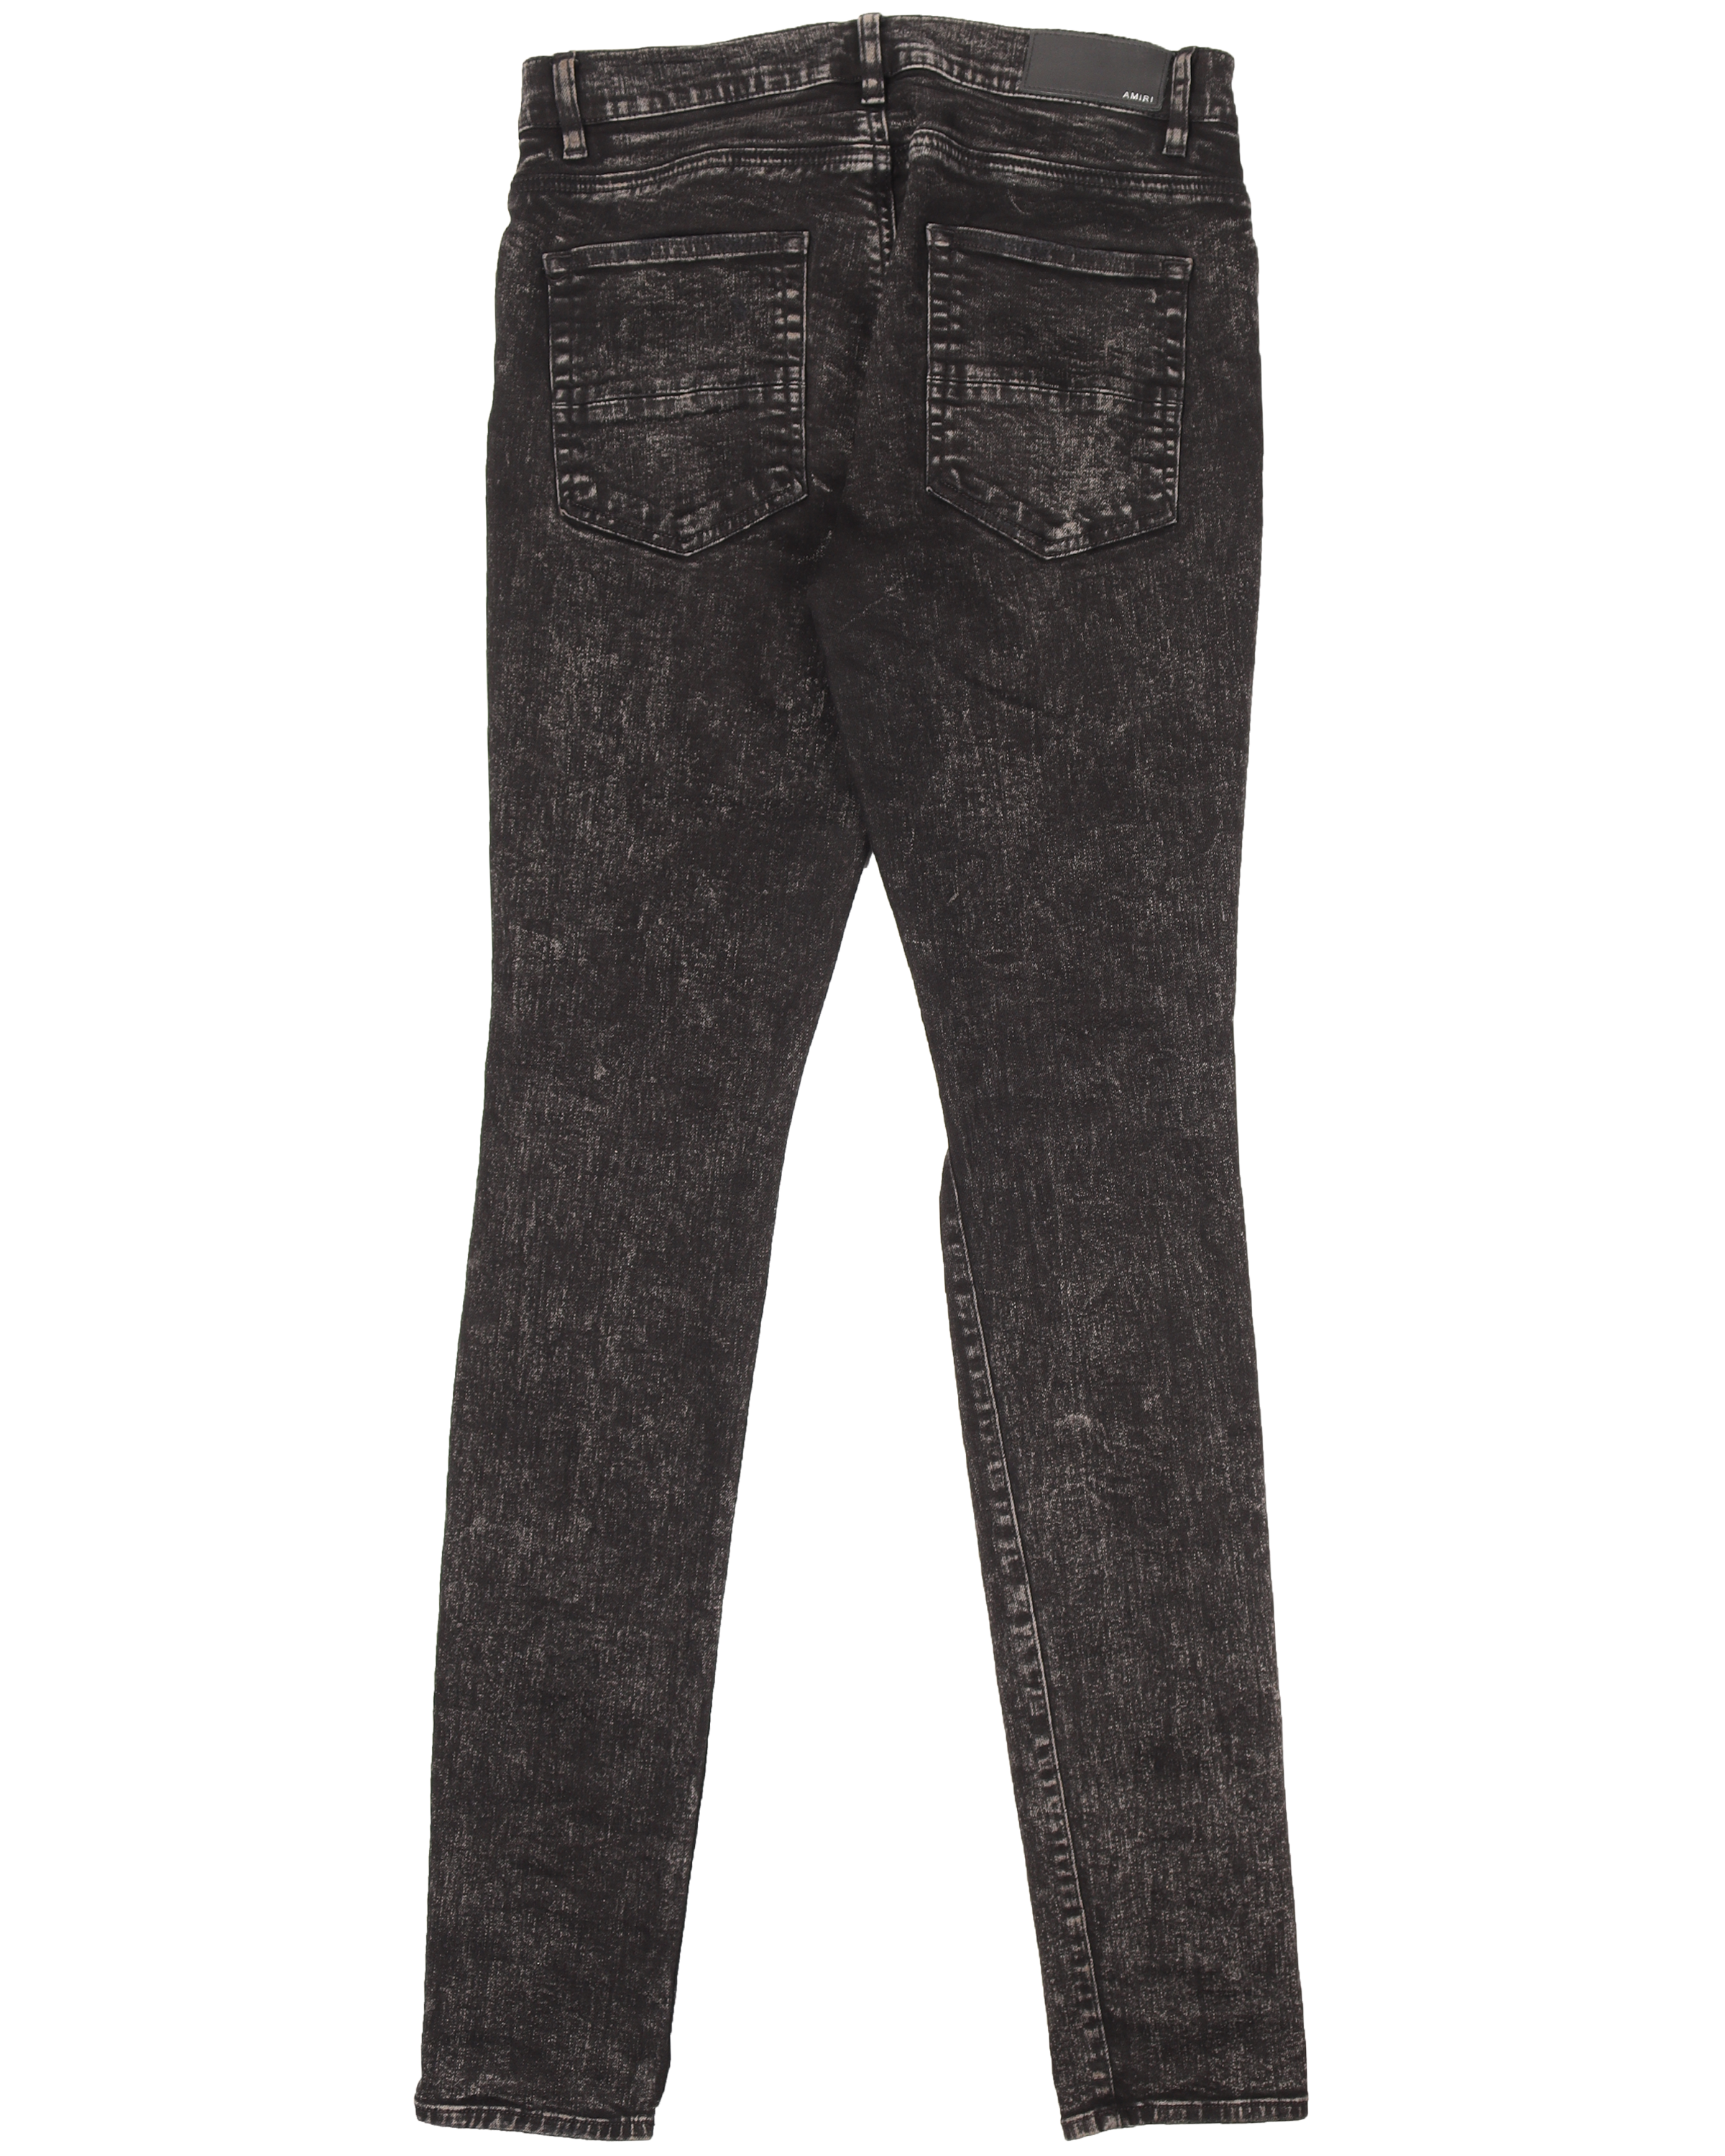 Distressed Washed Black Jeans